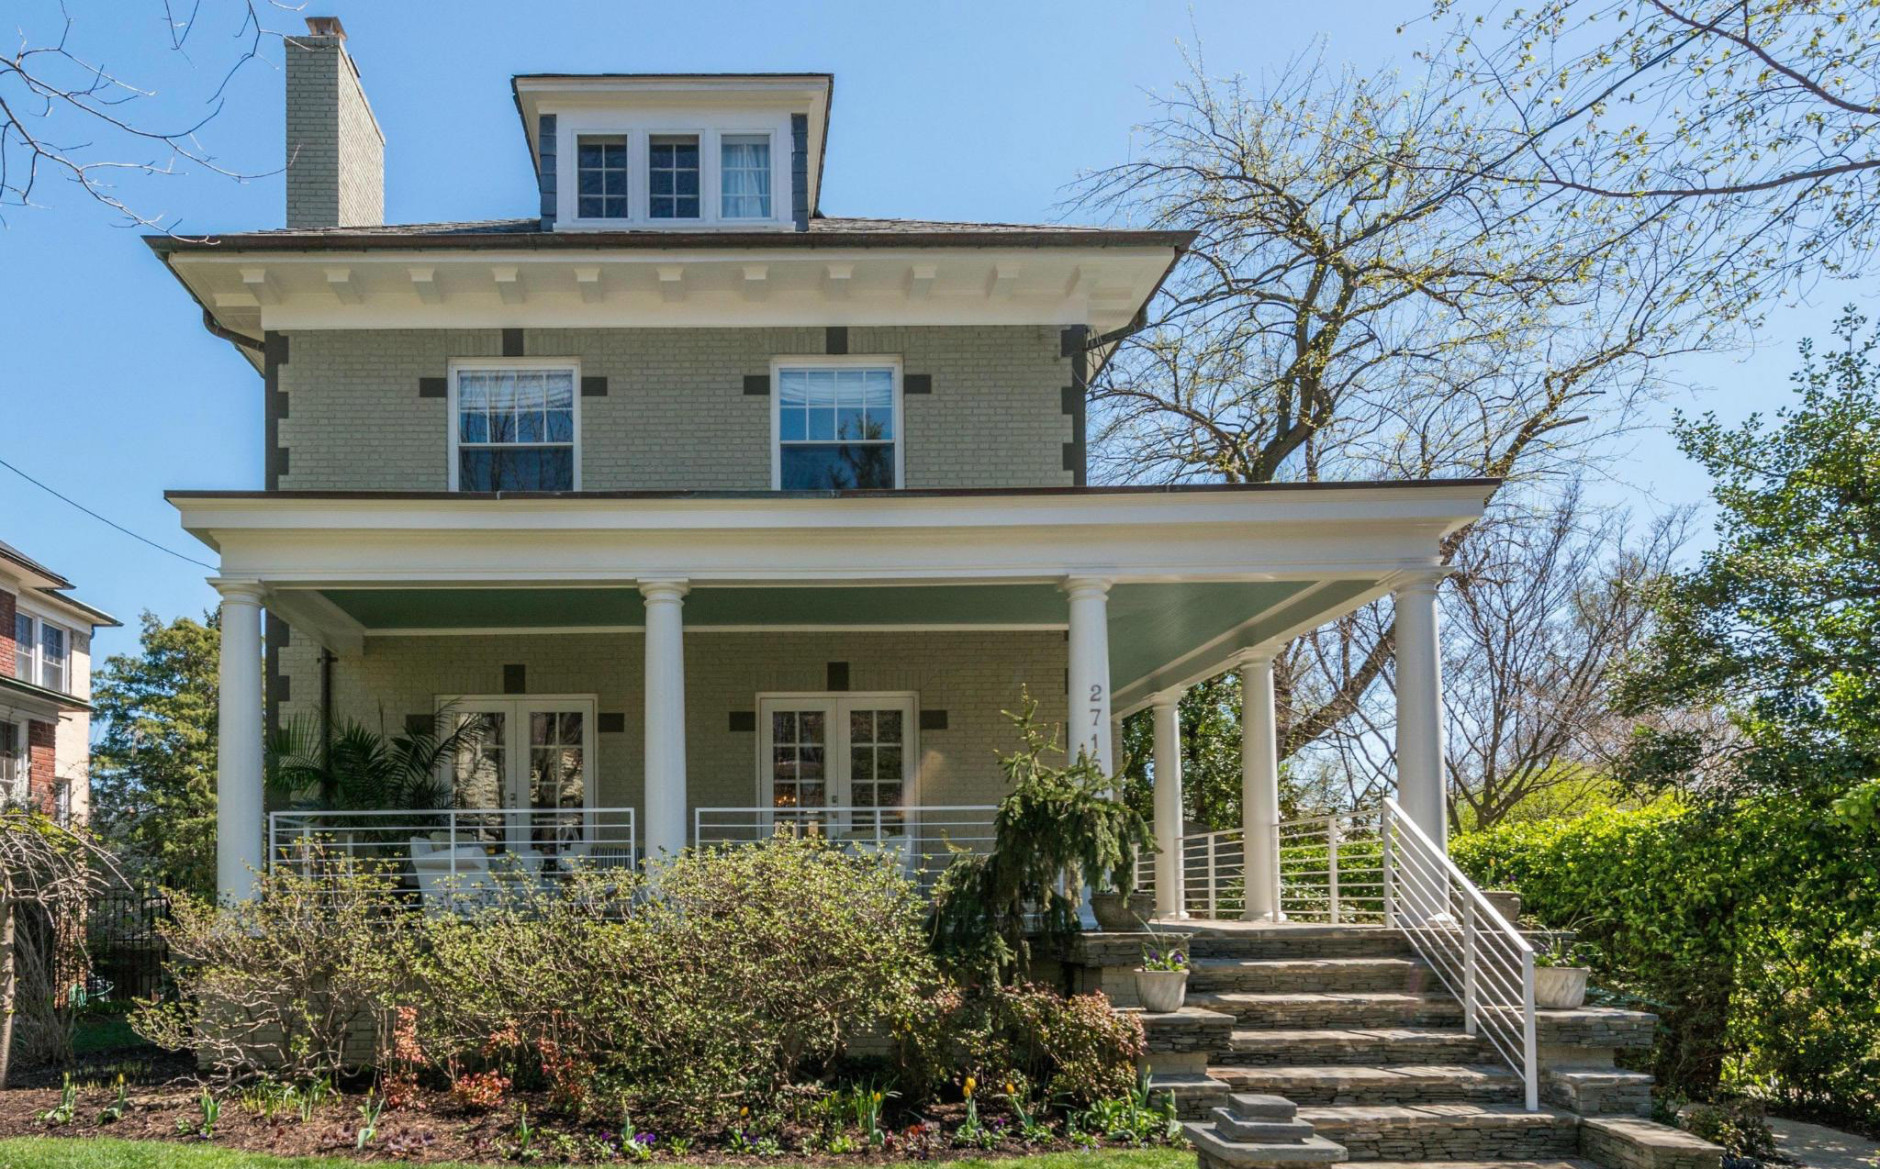 Built in 1926, the home at 2715 36th Place has five bedrooms and bathrooms.